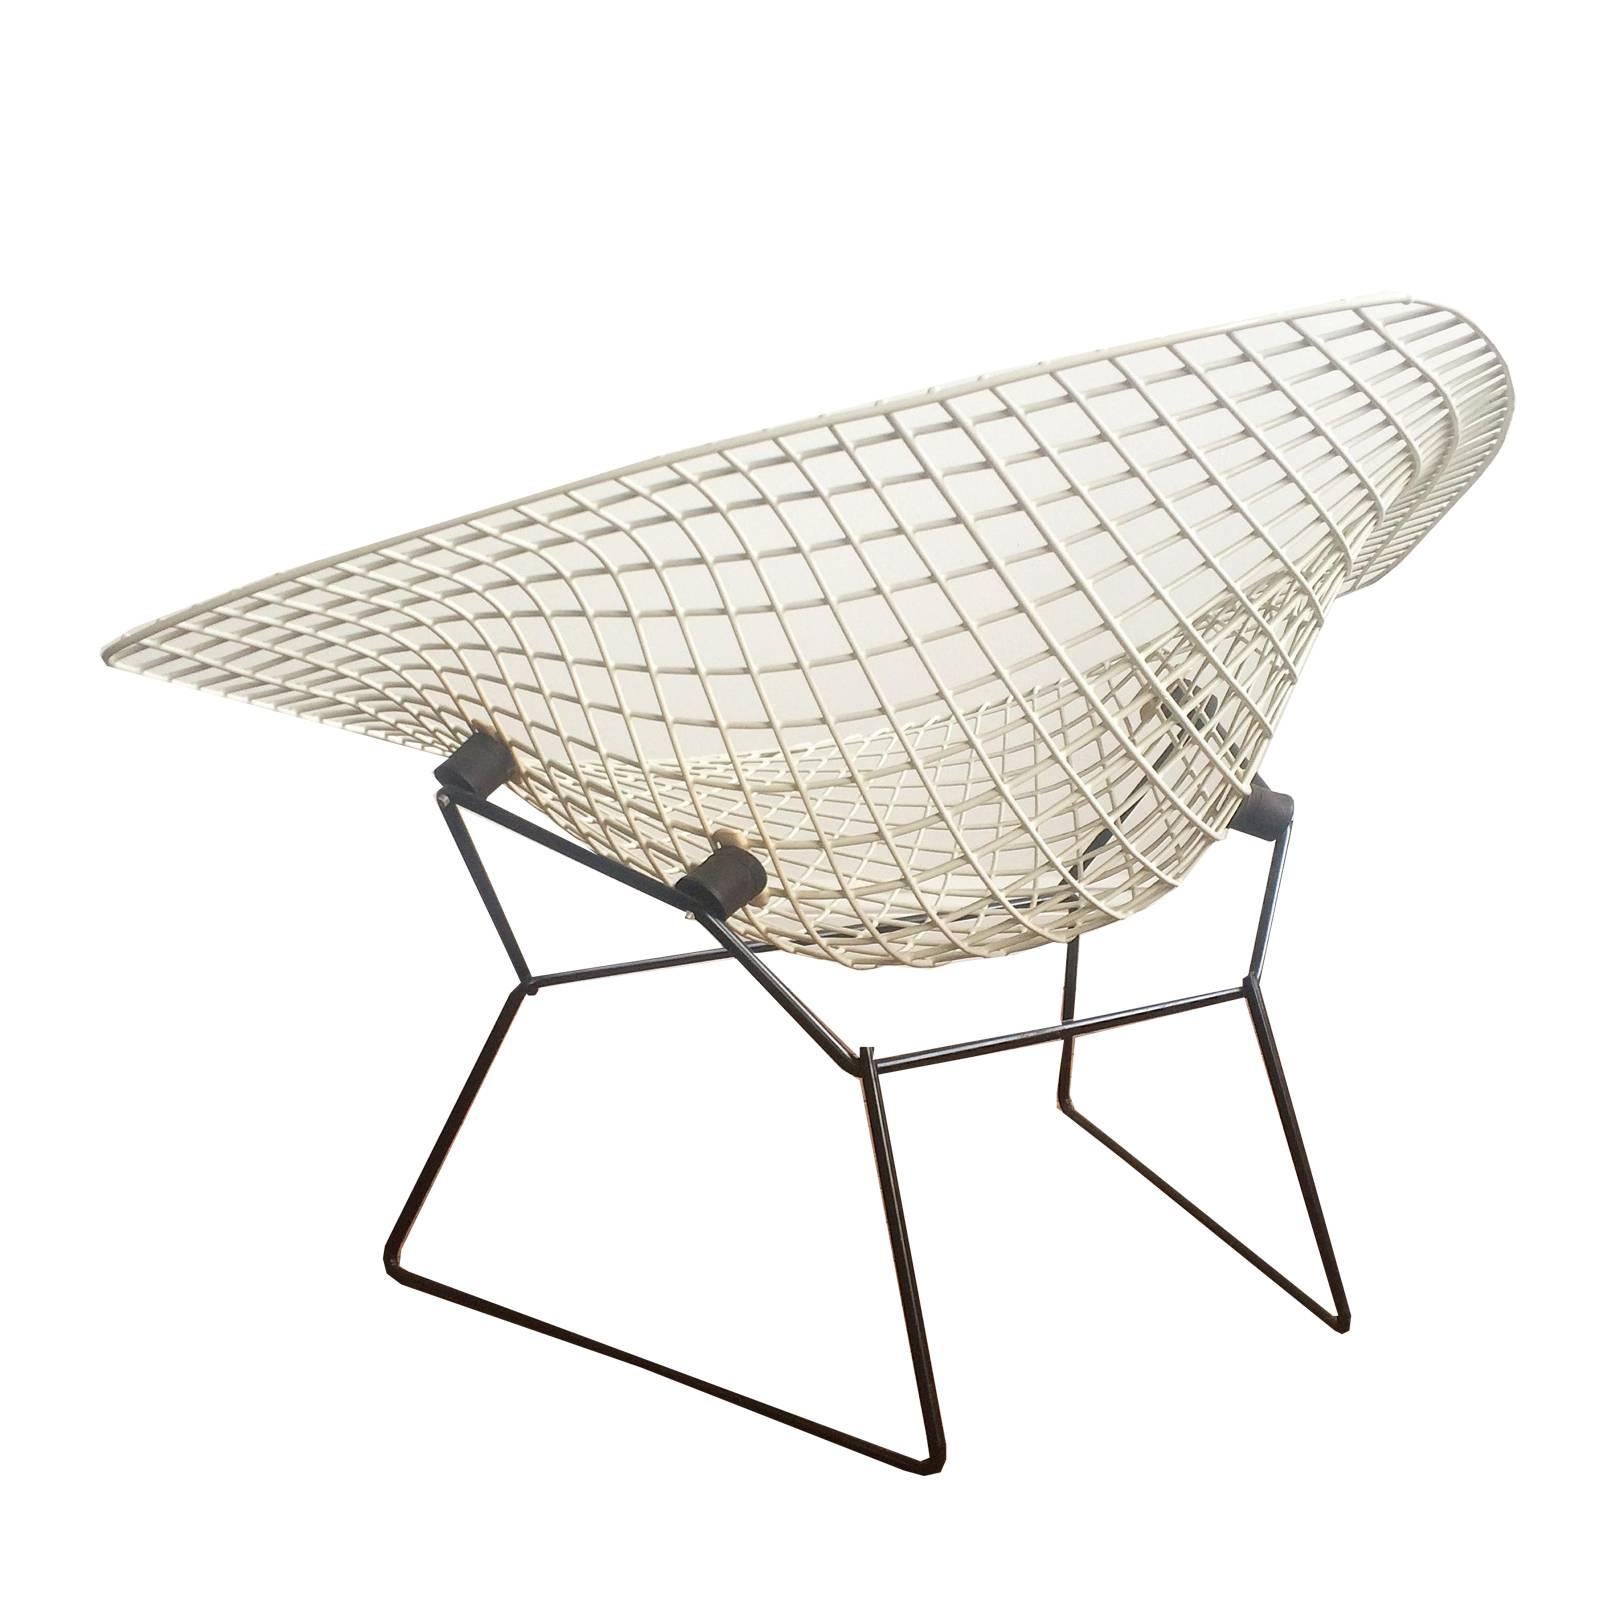 Authentic wide version of the iconic Diamond chair designed by Harry Bertoia for Knoll. Made of a welded metal mesh frame powder coated in white with a powder coated black base. The chair comes with a new yellow fabric seat cushion.

 